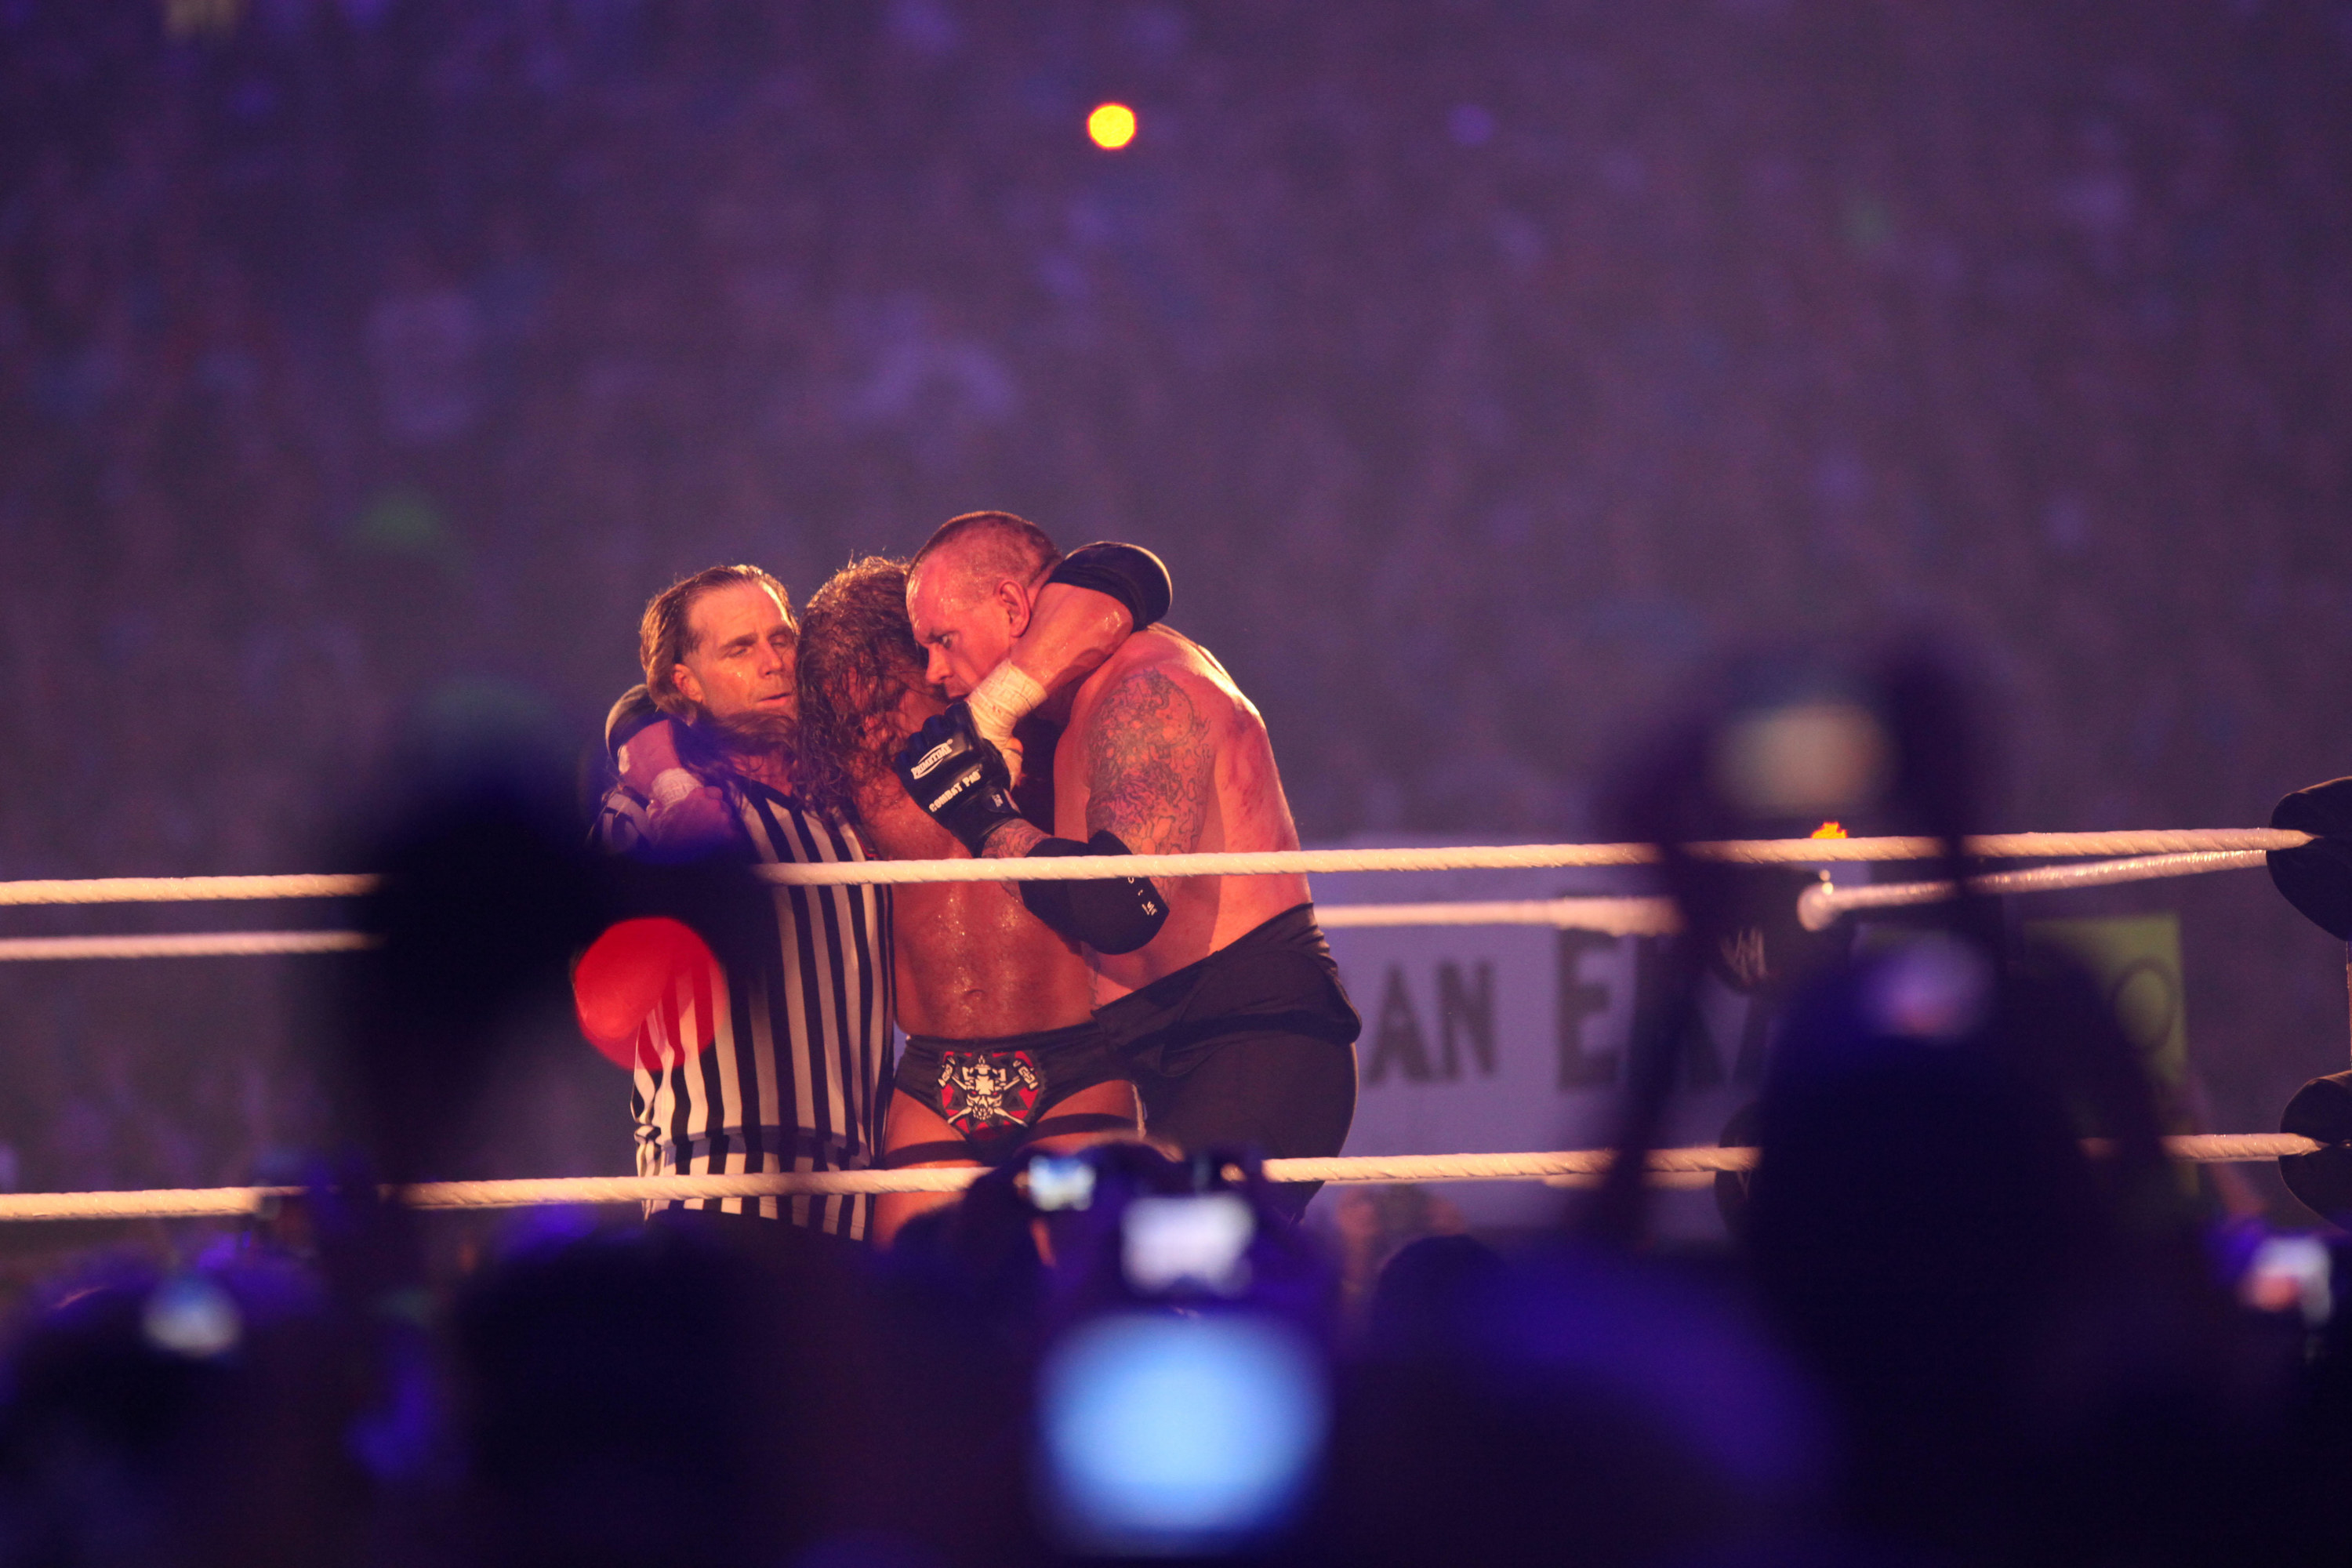 Shawn Michaels, Triple H and The Undertaker at Wrestlemania 28